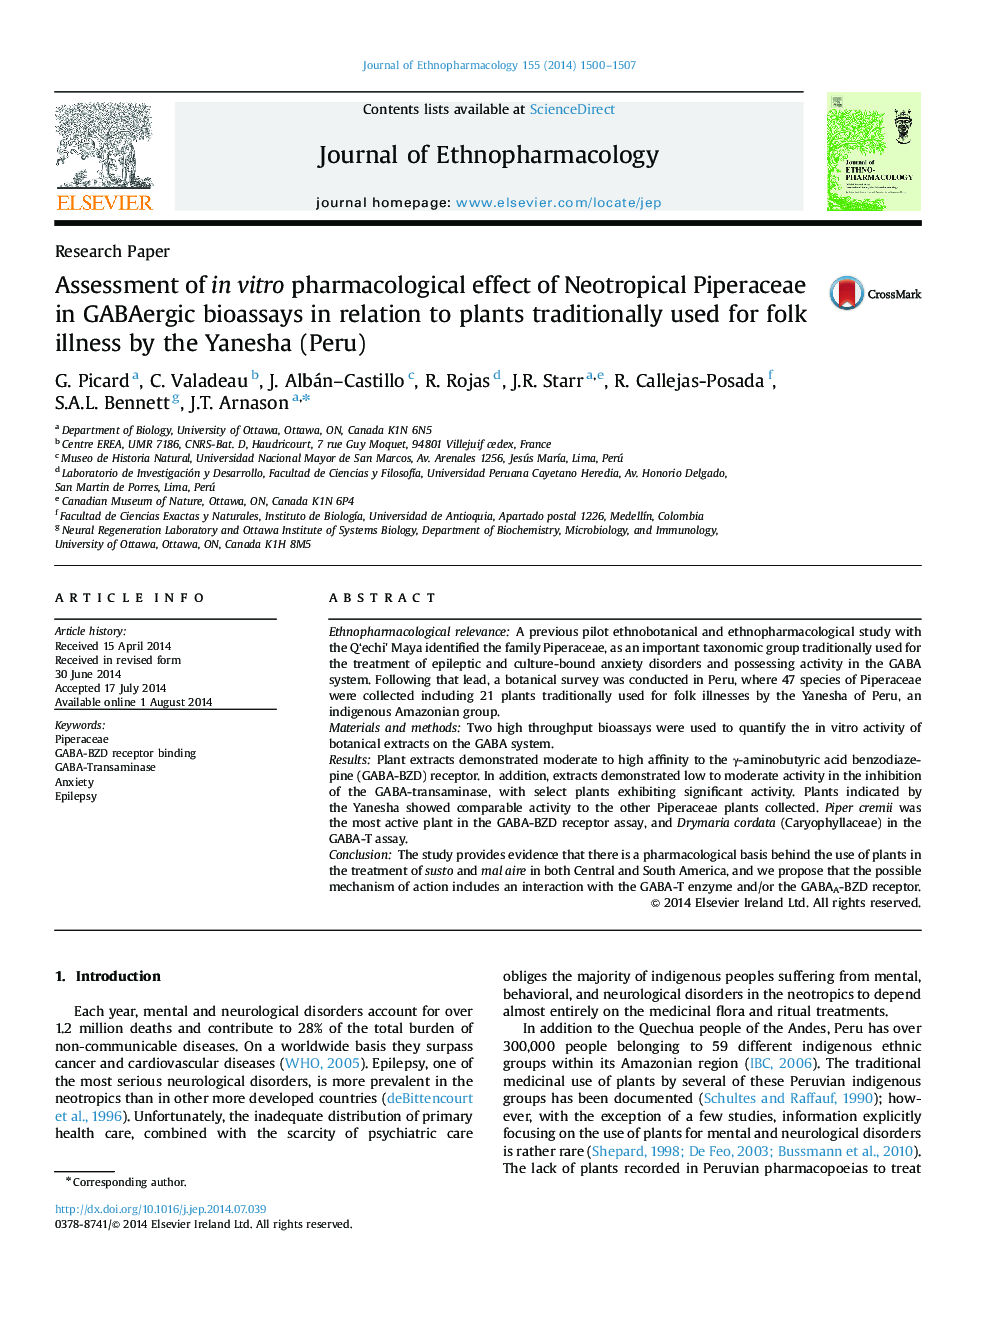 Assessment of in vitro pharmacological effect of Neotropical Piperaceae in GABAergic bioassays in relation to plants traditionally used for folk illness by the Yanesha (Peru)